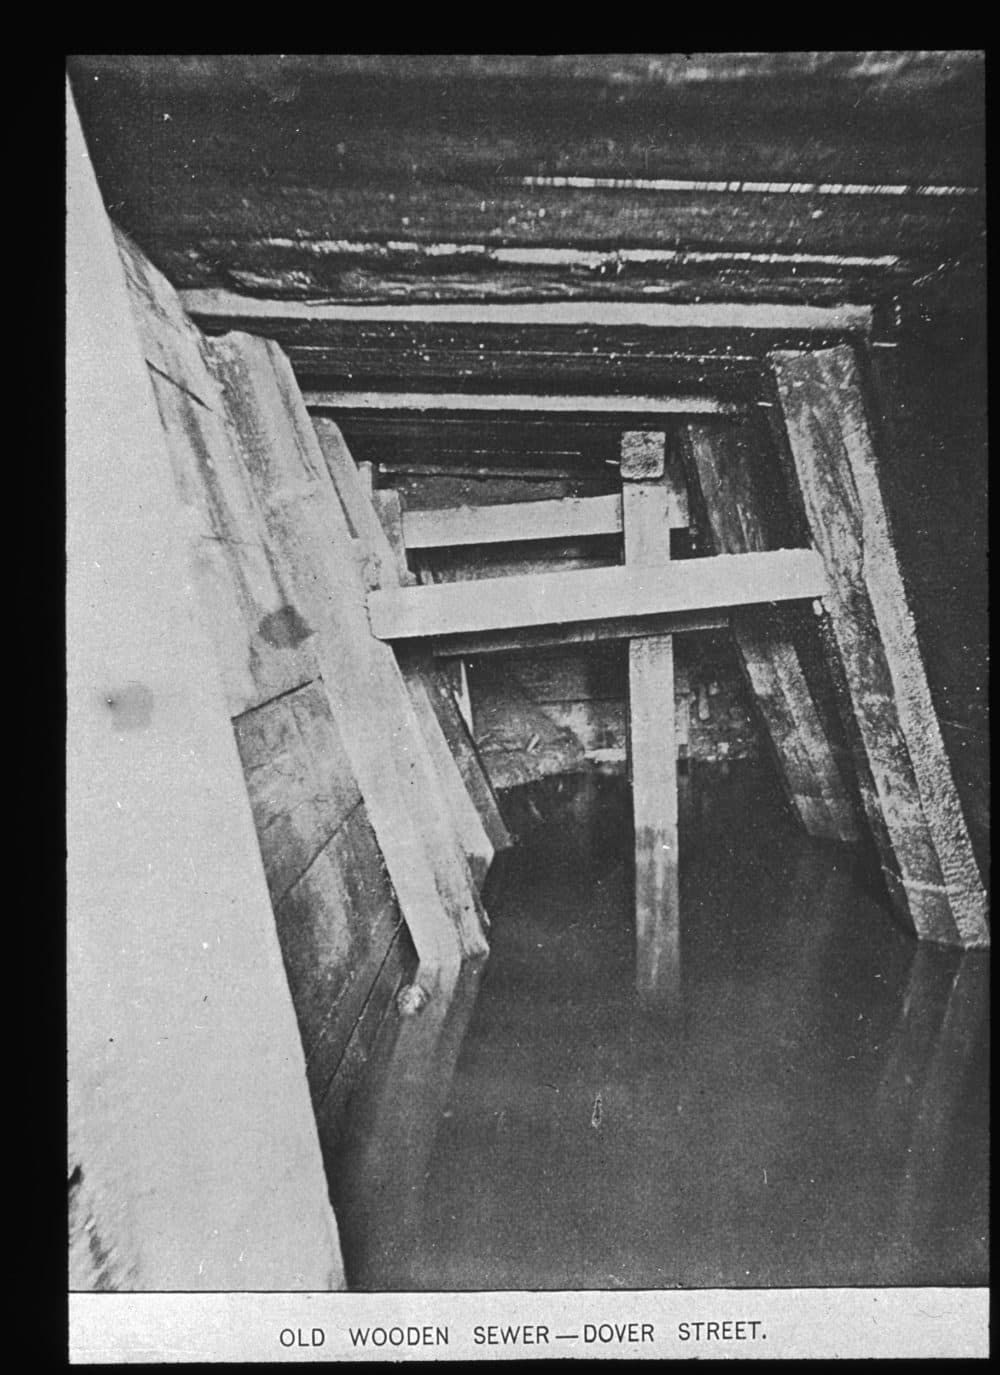 This wooden sewer line was considered old when this photo was taken during the 1880s (Courtesy Boston Public Library)